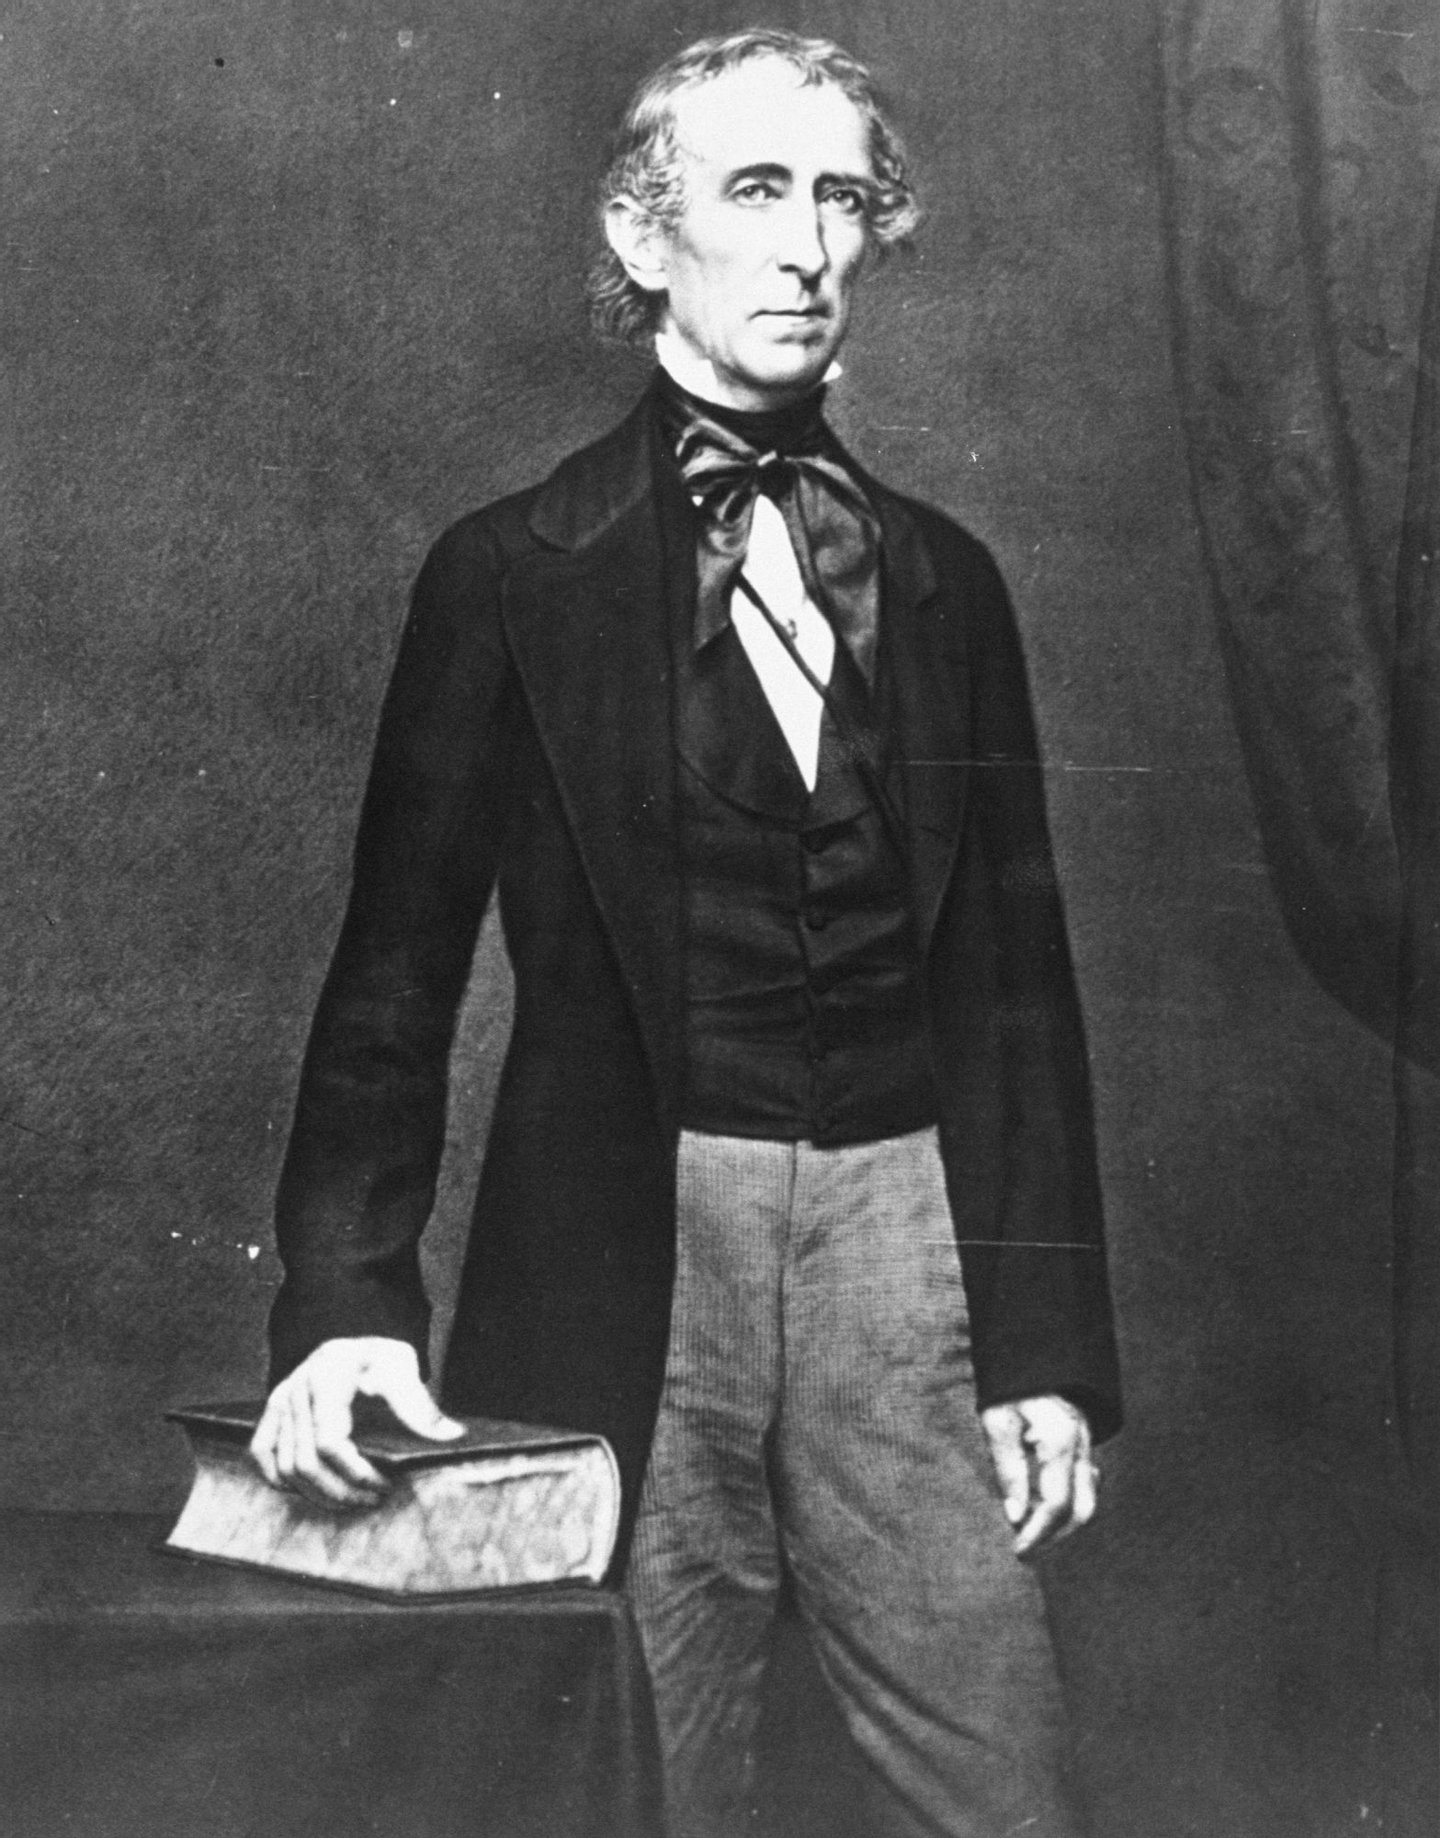 377869 10: Portrait of 10th United States President John Tyler. (1790-1862) (Courtesy of the National Archives/Newsmakers)